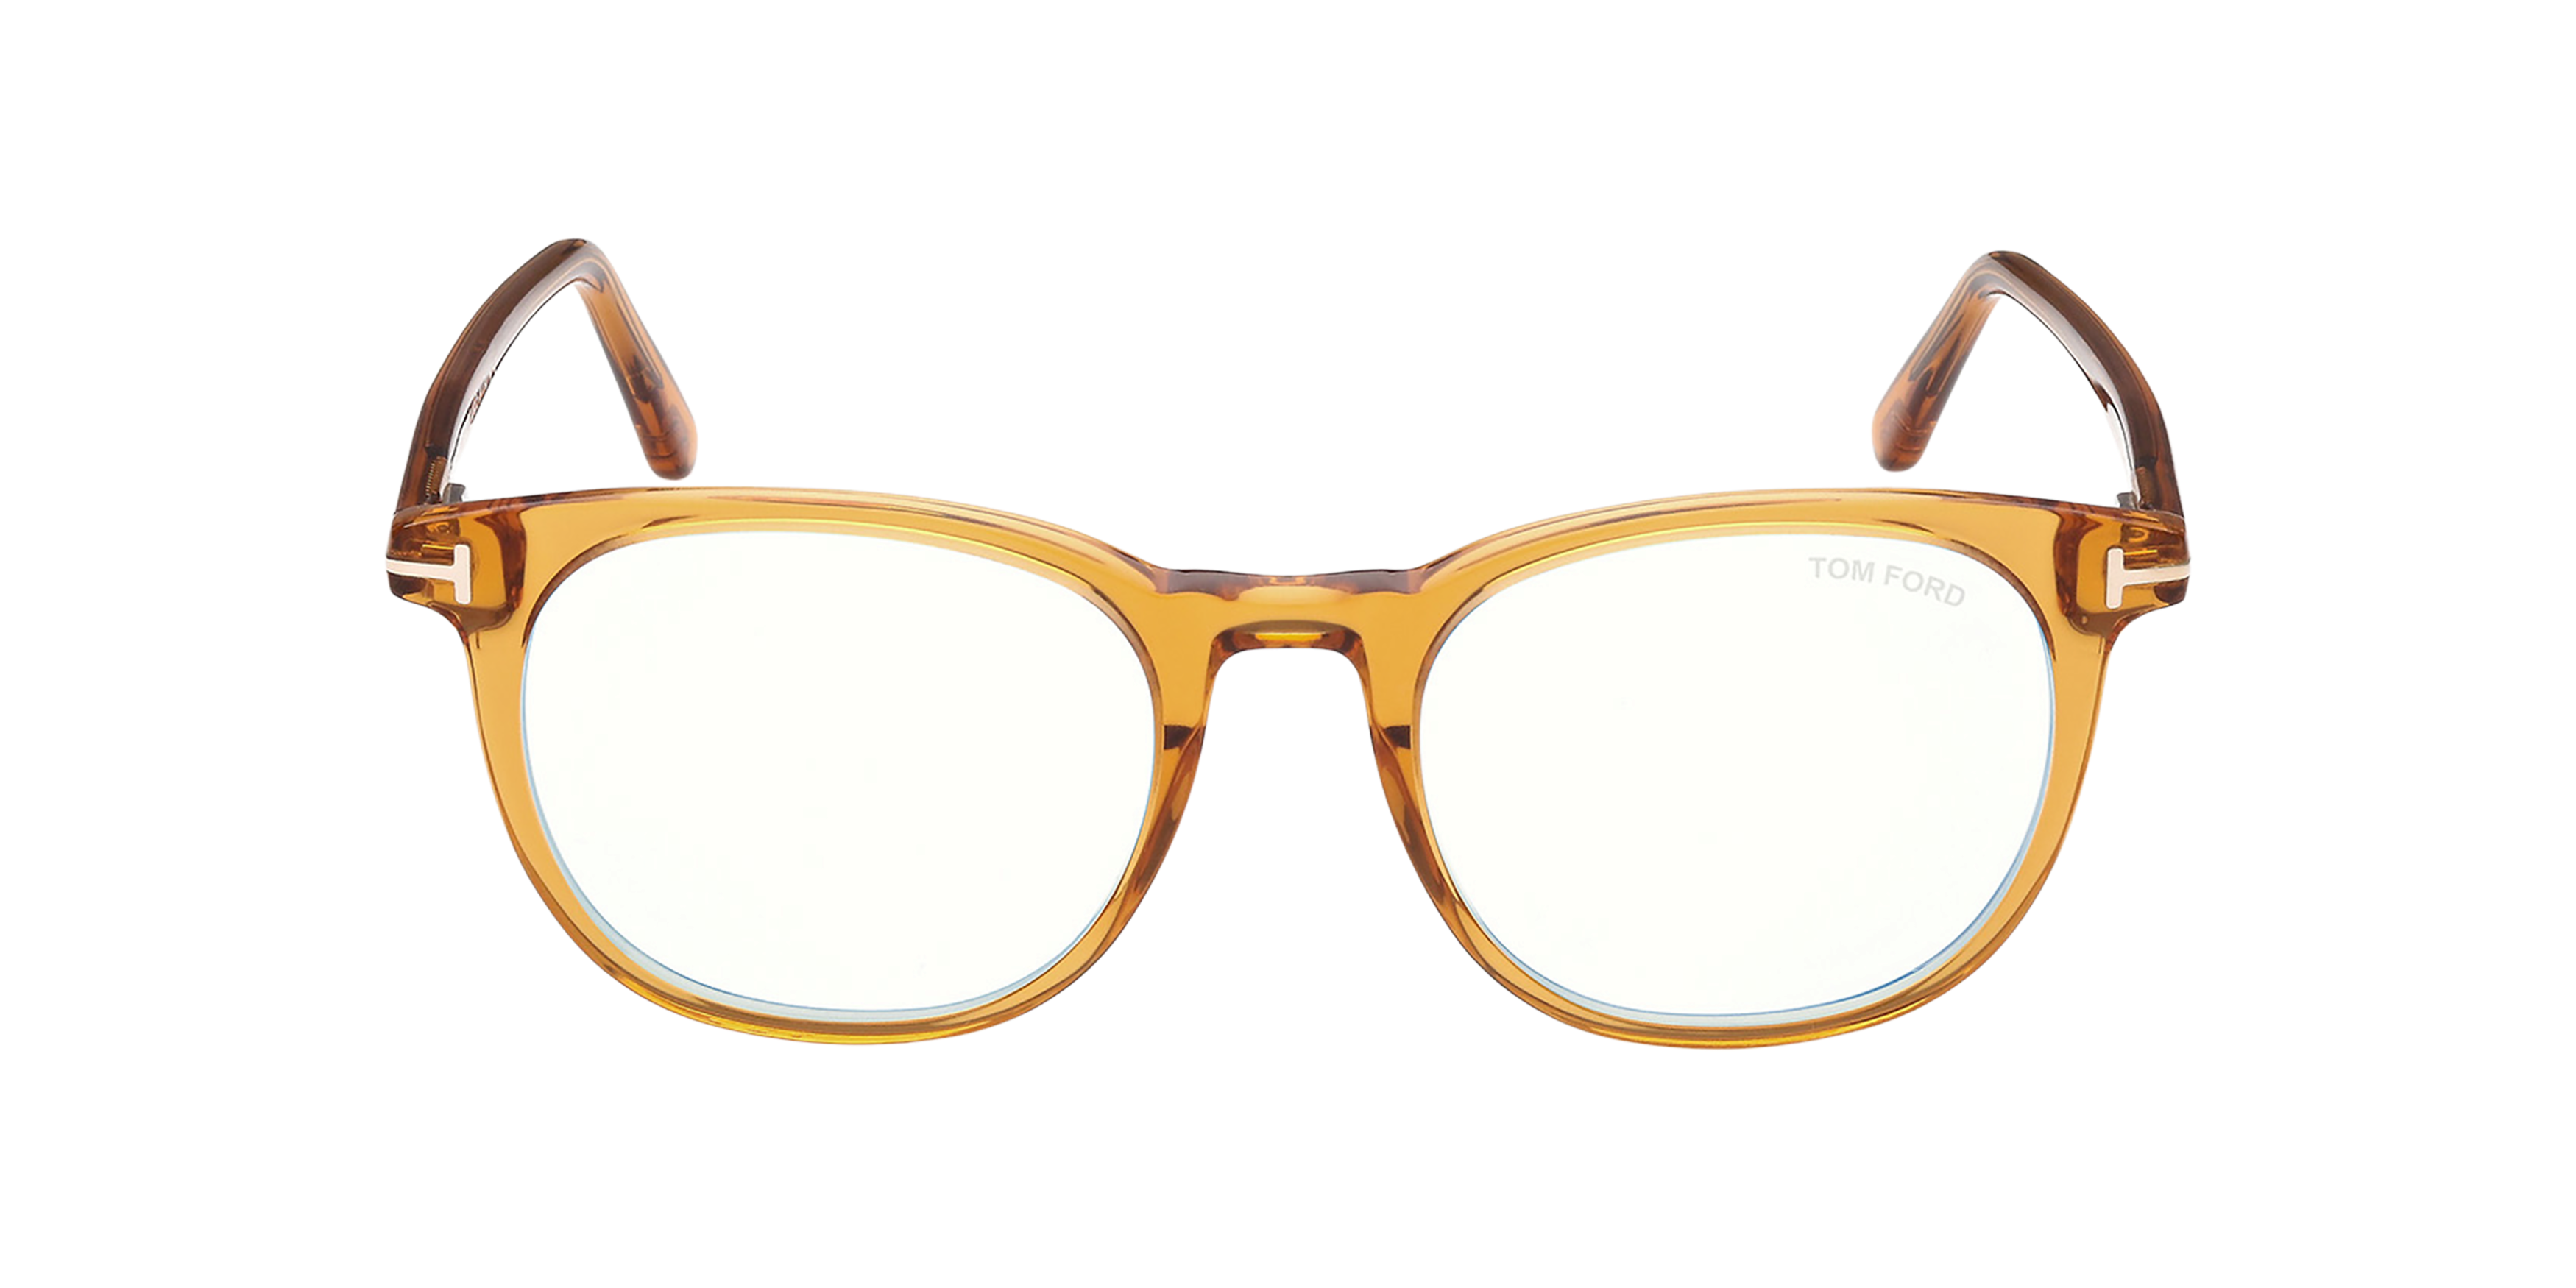 Front Tom Ford FT 5754-B (041) Glasses Transparent / Yellow